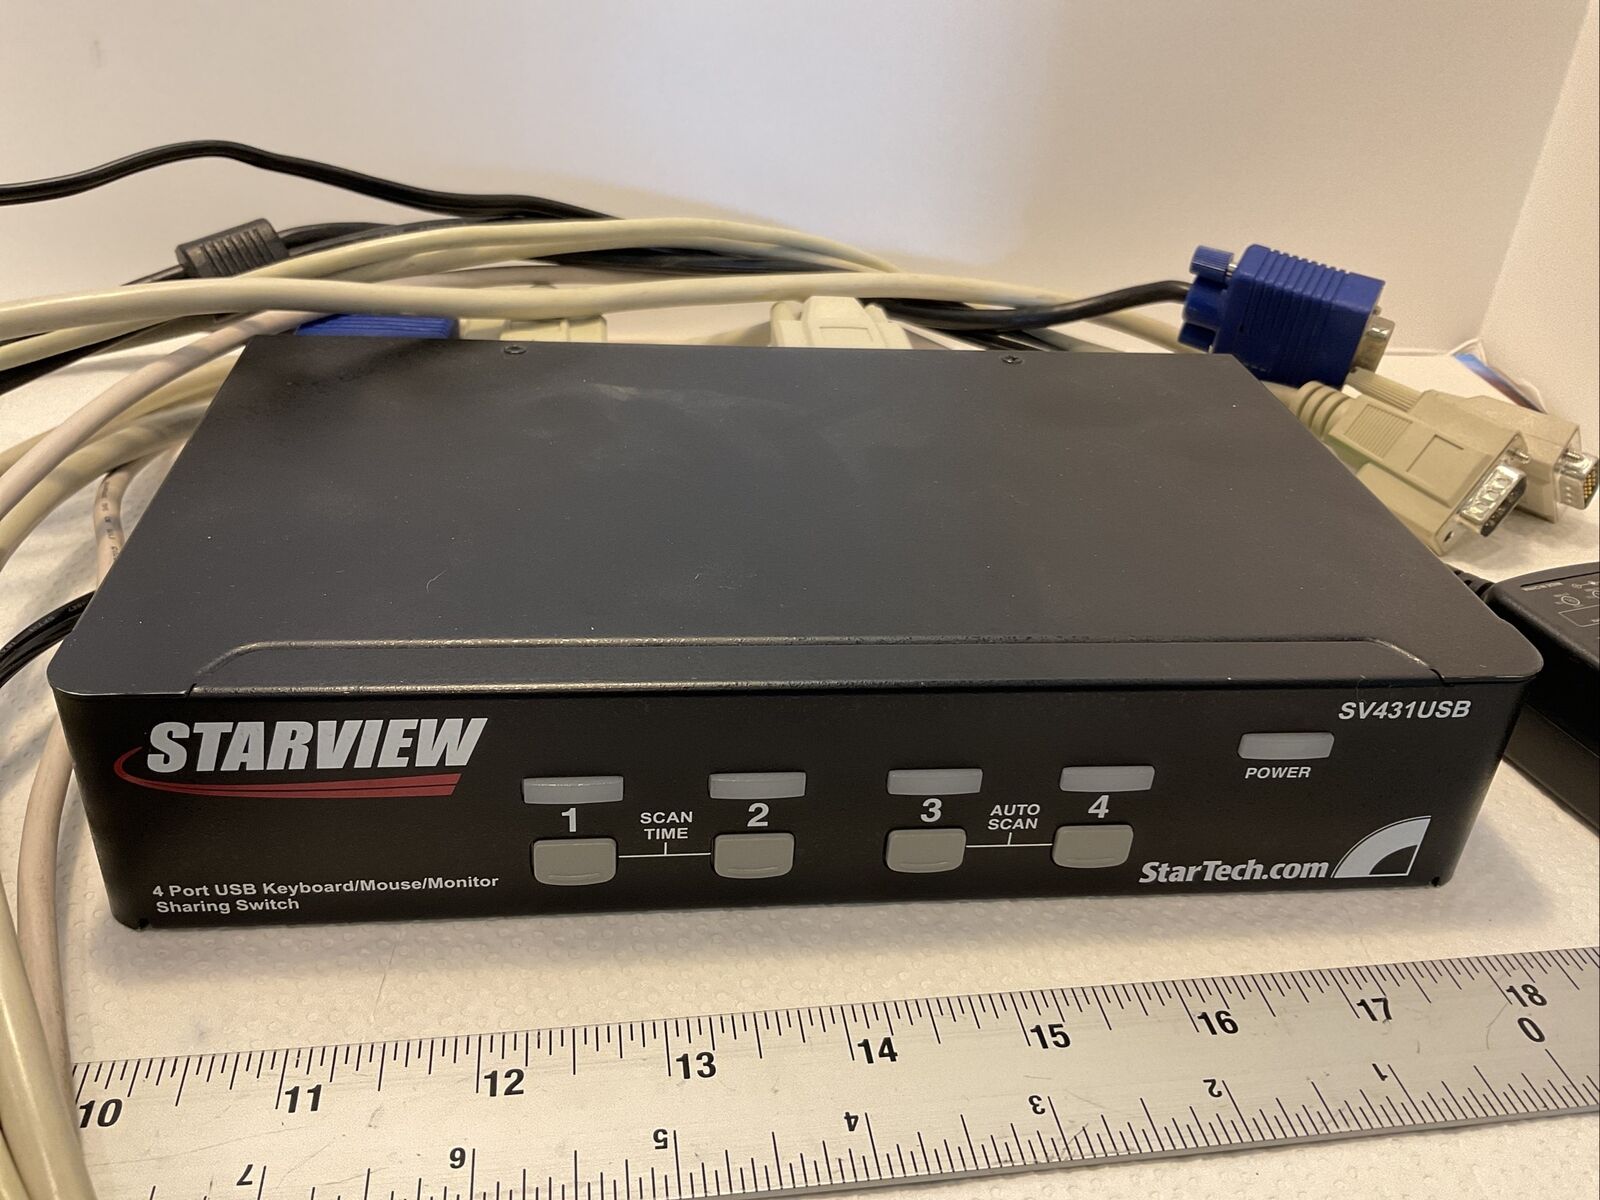 Starview SV431USB 4 port keyboard/mouse/monitor sharing switch, Startech W Cable